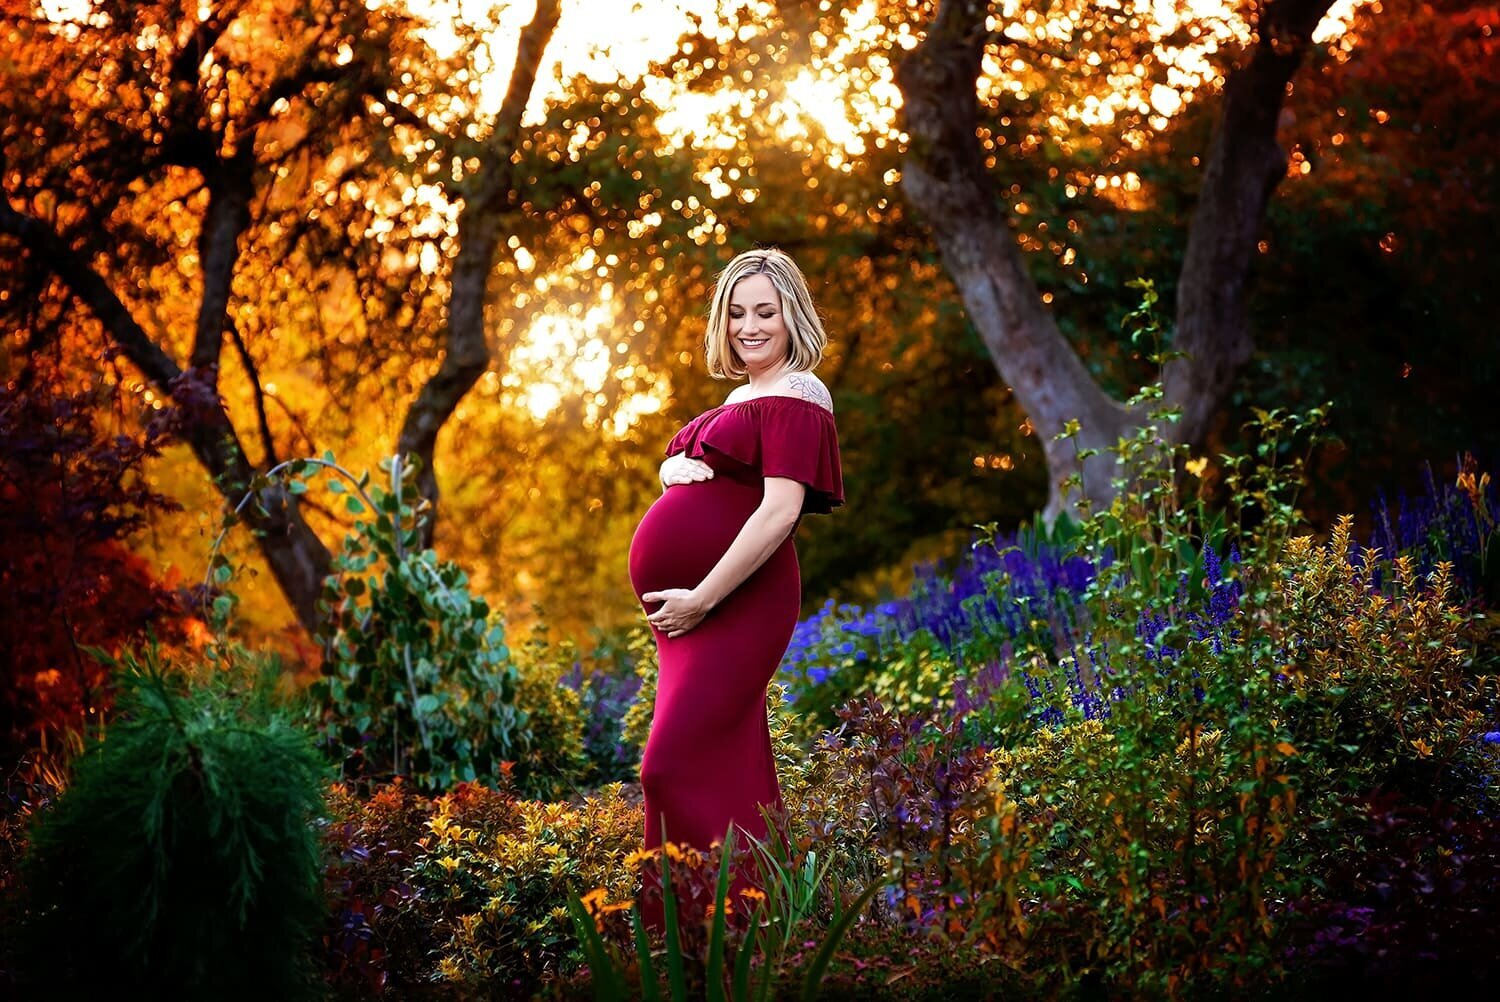 Pregnant woman in red dress surrounded by flowers at sunset